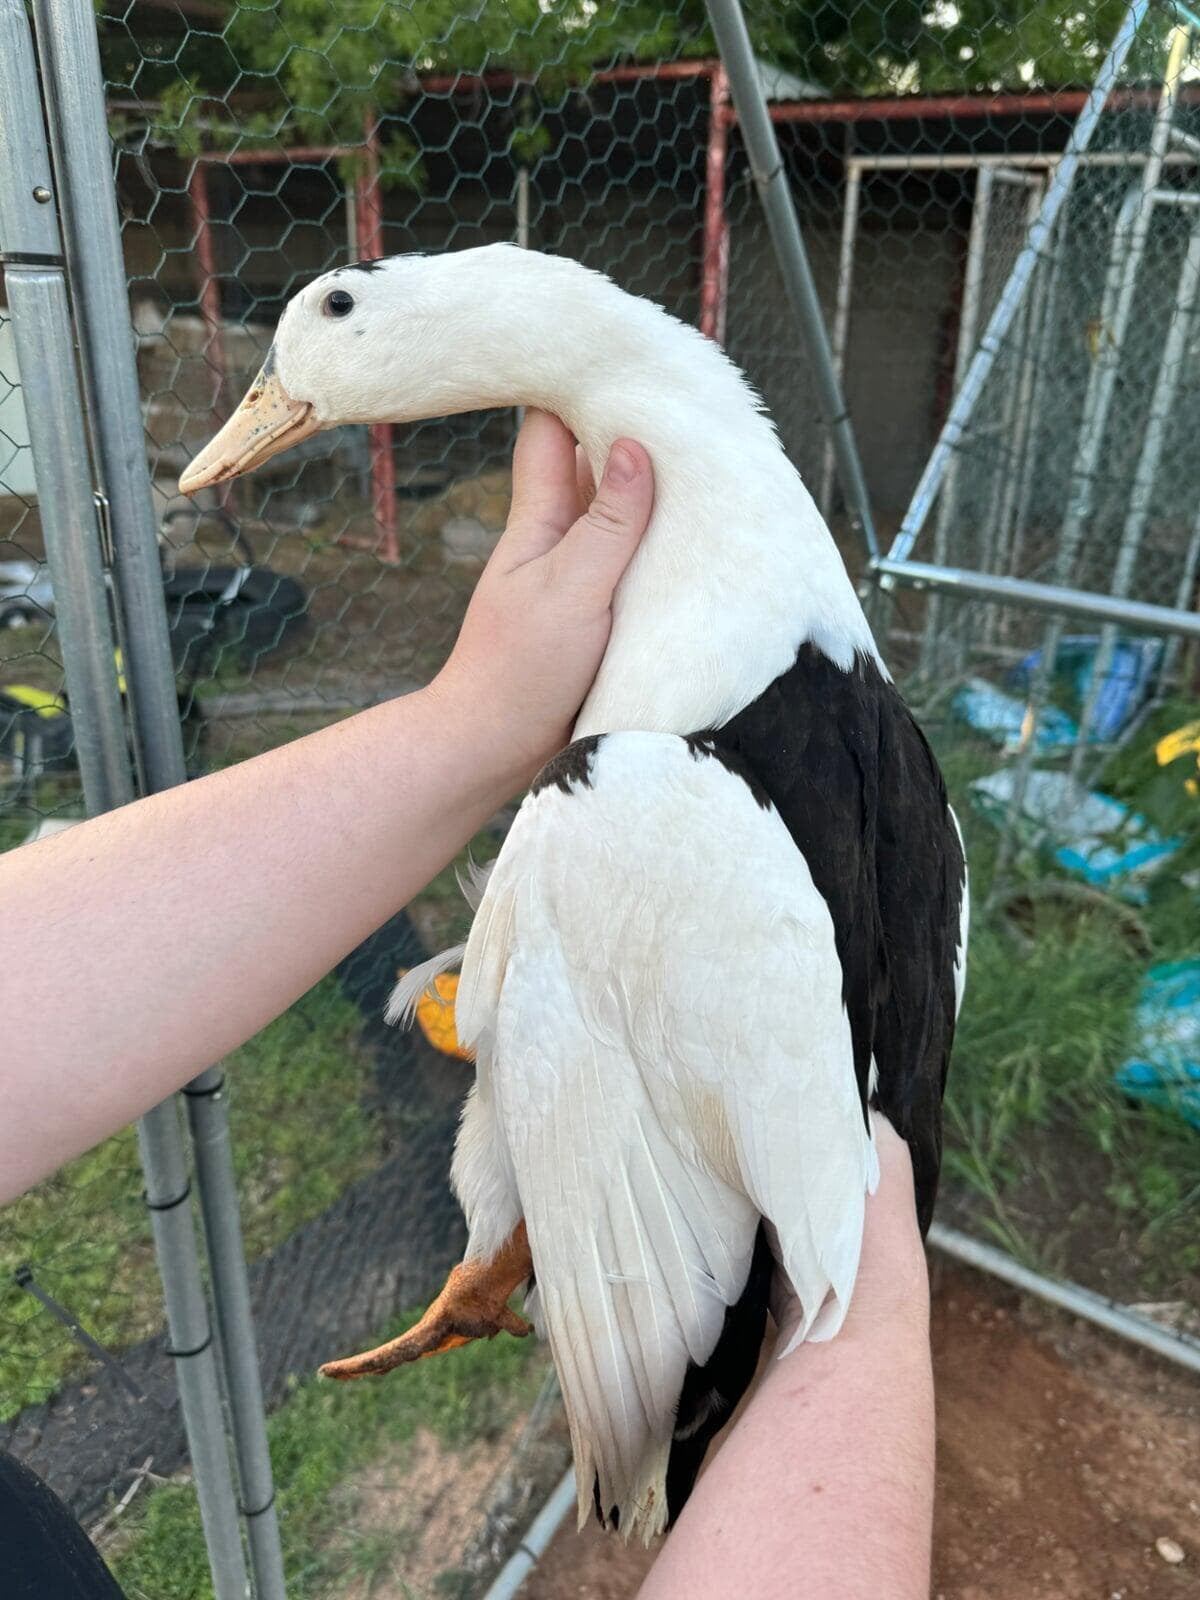 A female black and white magpie duck being held by a person.